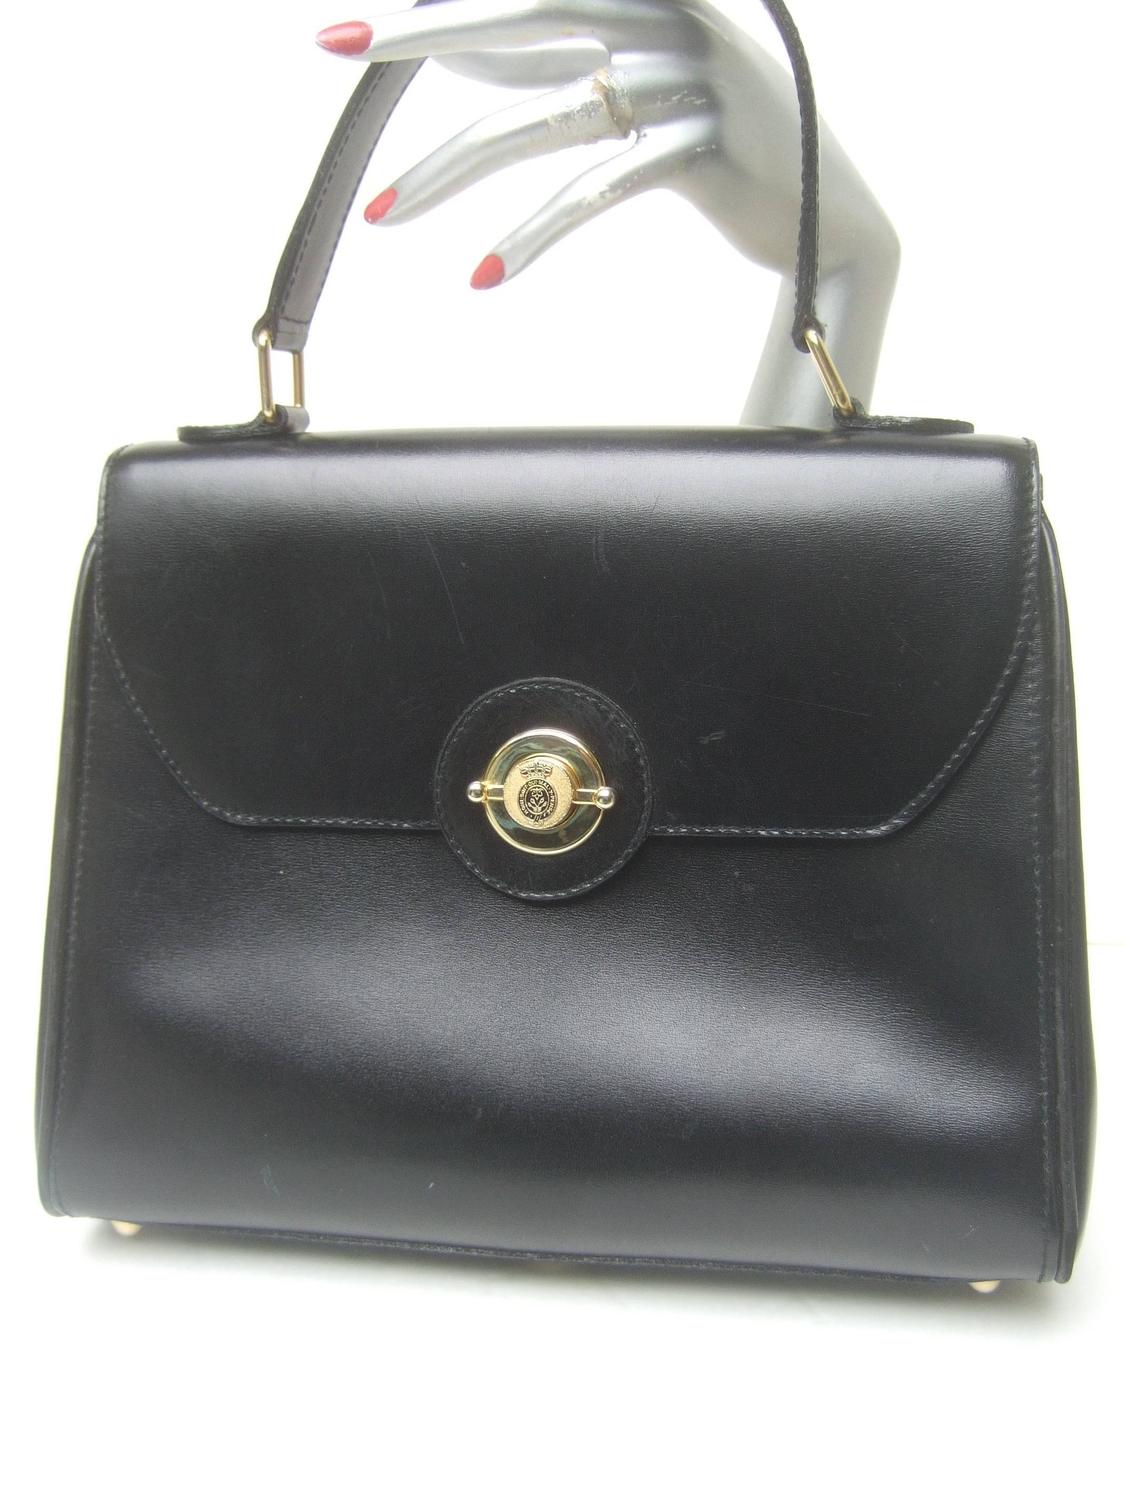 Saks Fifth Avenue Ebony Leather Handbag Made in Italy For Sale at 1stdibs